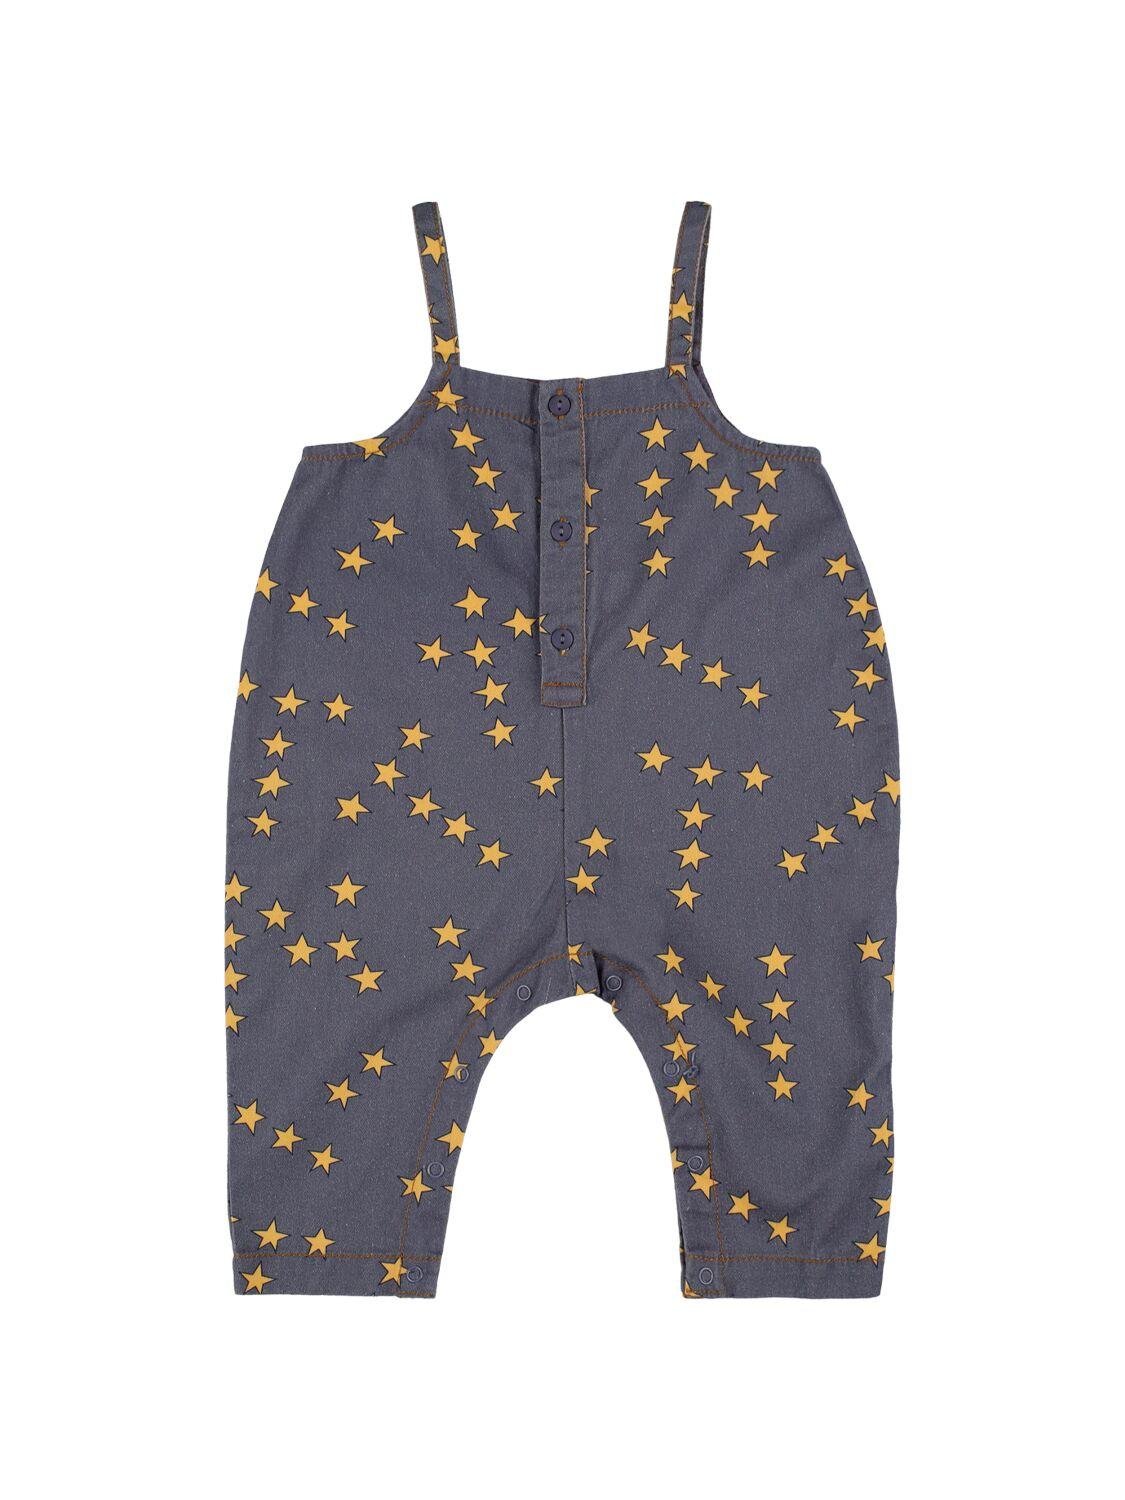 Star Print Cotton Denim Overalls by TINY COTTONS